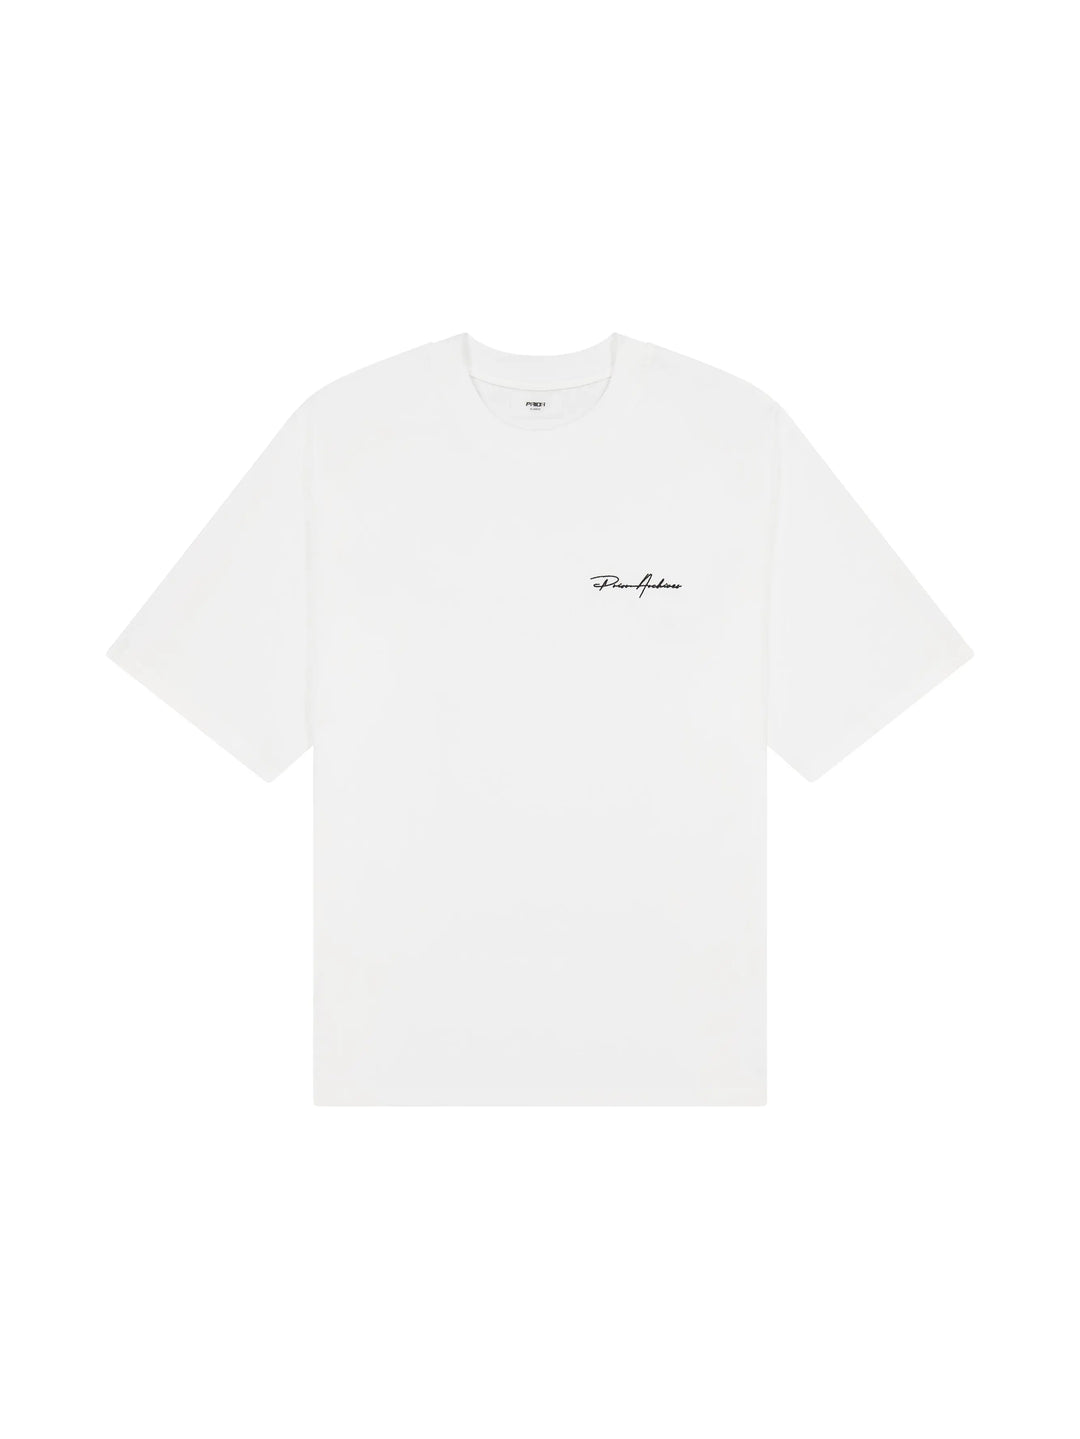 Prior Embroidery Logo Oversized T-shirt Fog in Auckland, New Zealand - Shop name